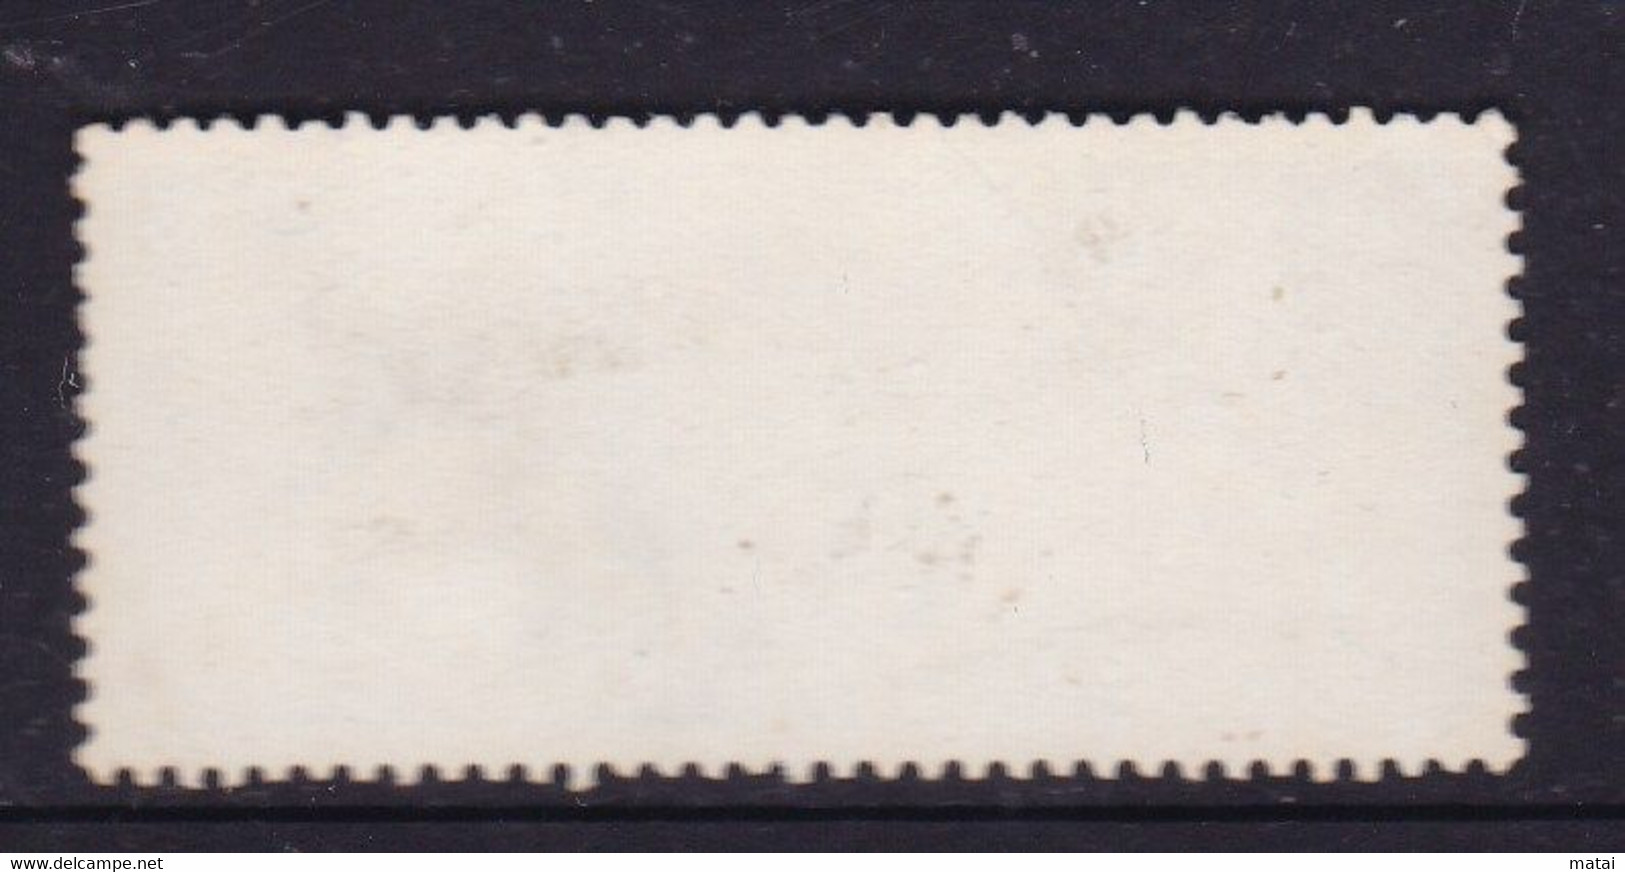 CHINA CHINE CINA 1974.1.21 ACROBATICA 8c - Used Stamps